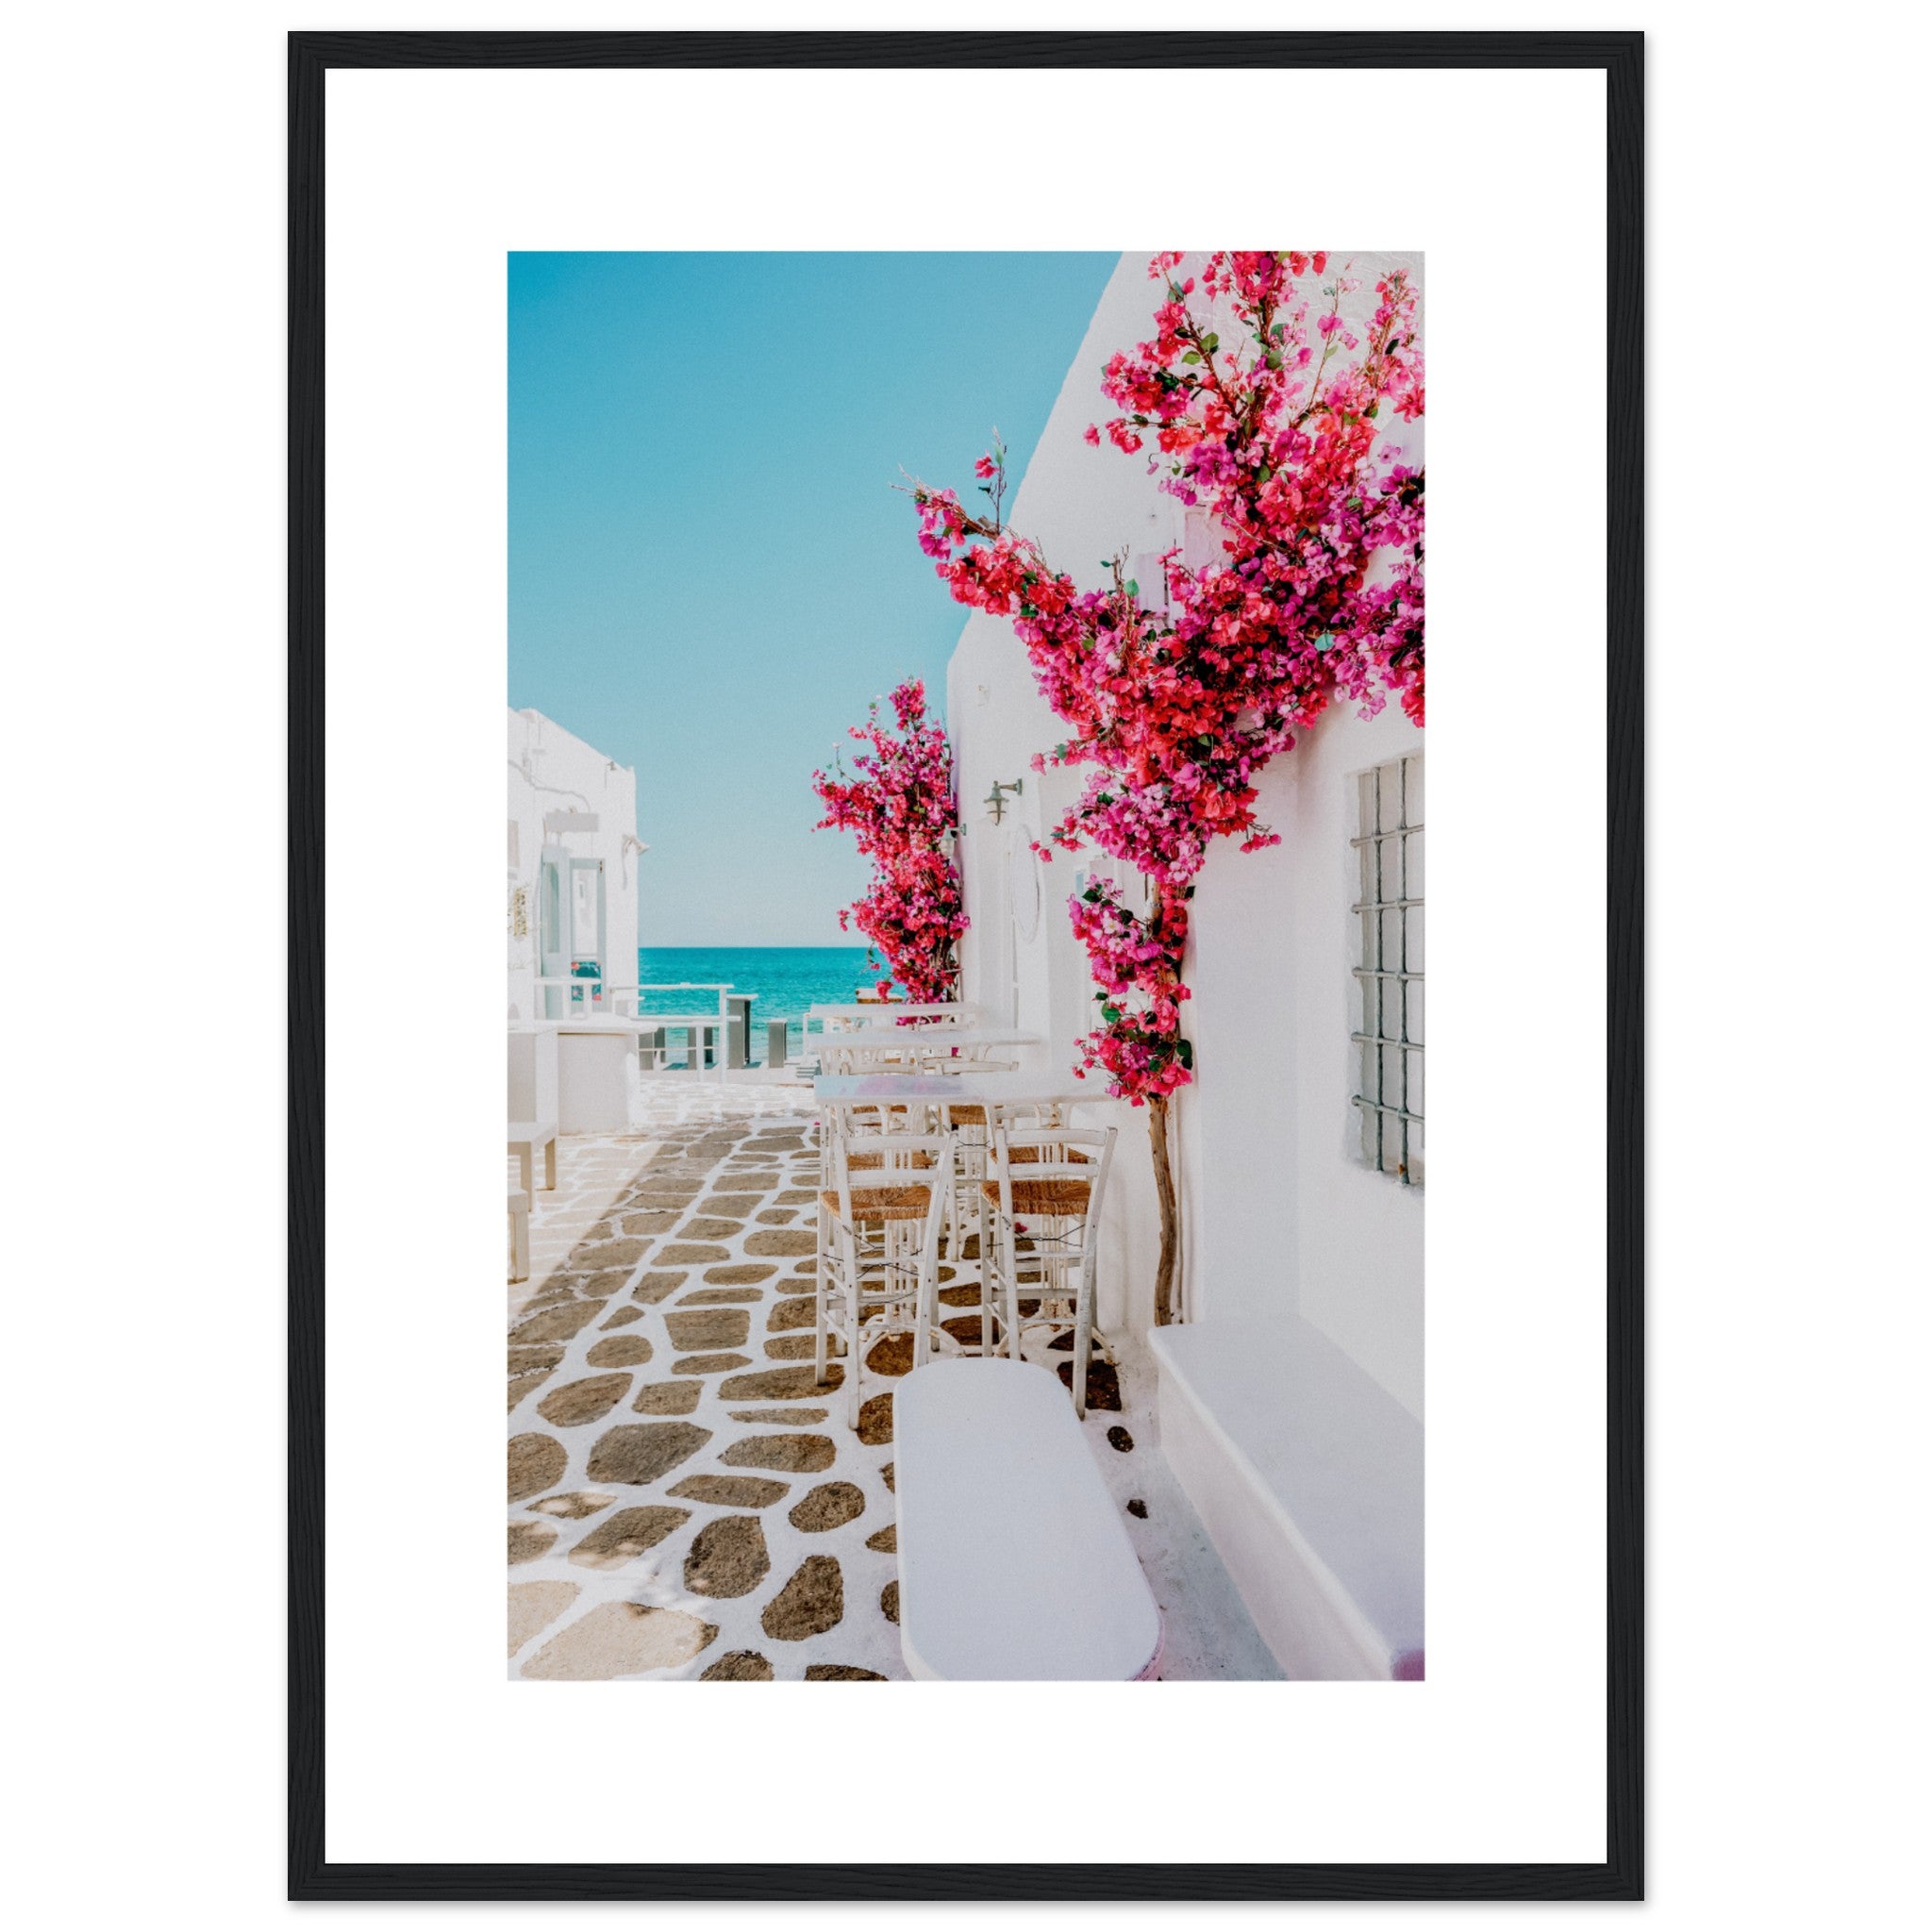 Alley And Houses With Red Bougainvillea Flowers Paros Island Poster